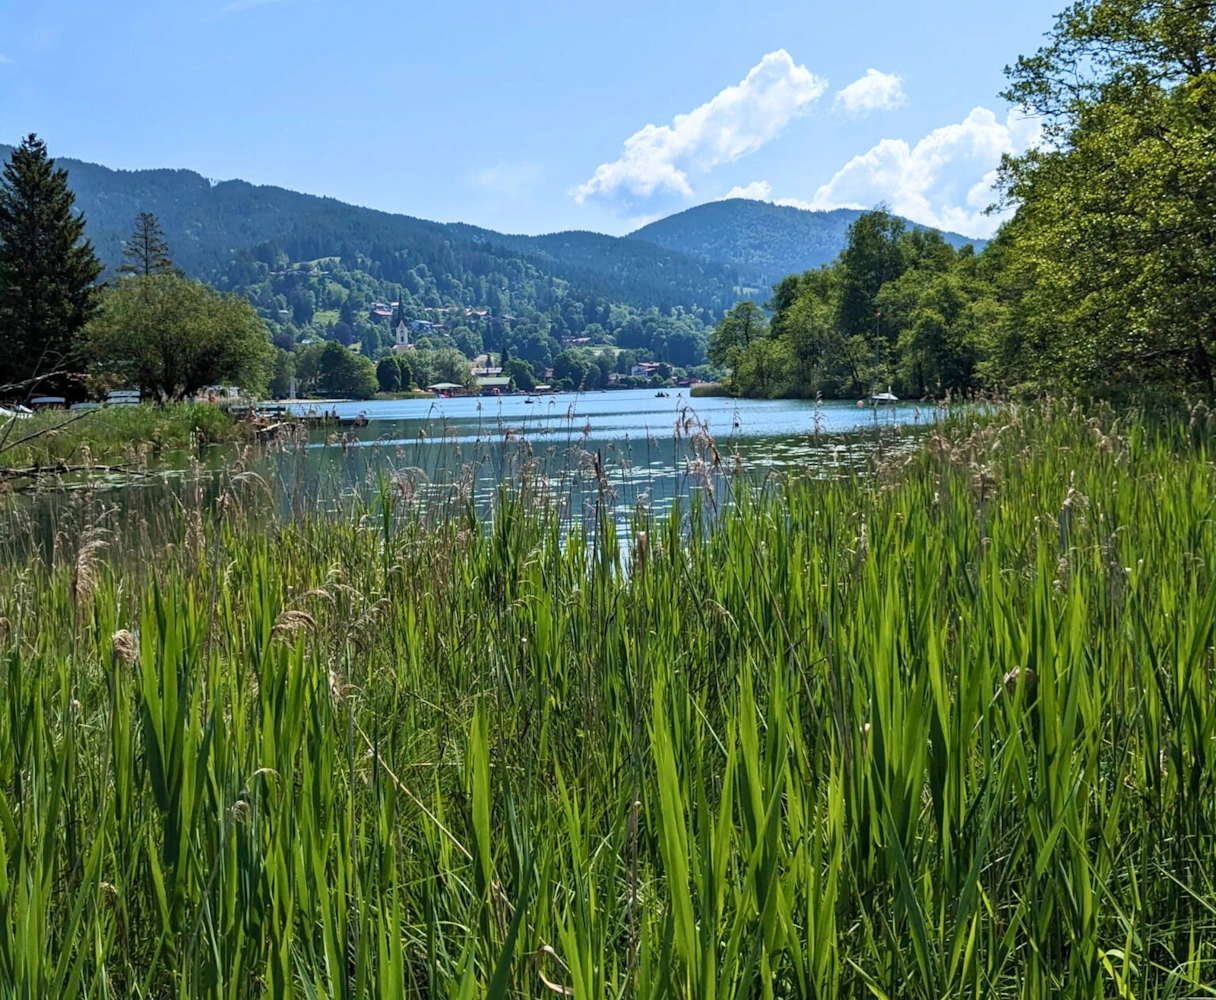 Lake Schliersee surrounded by plants and mountains